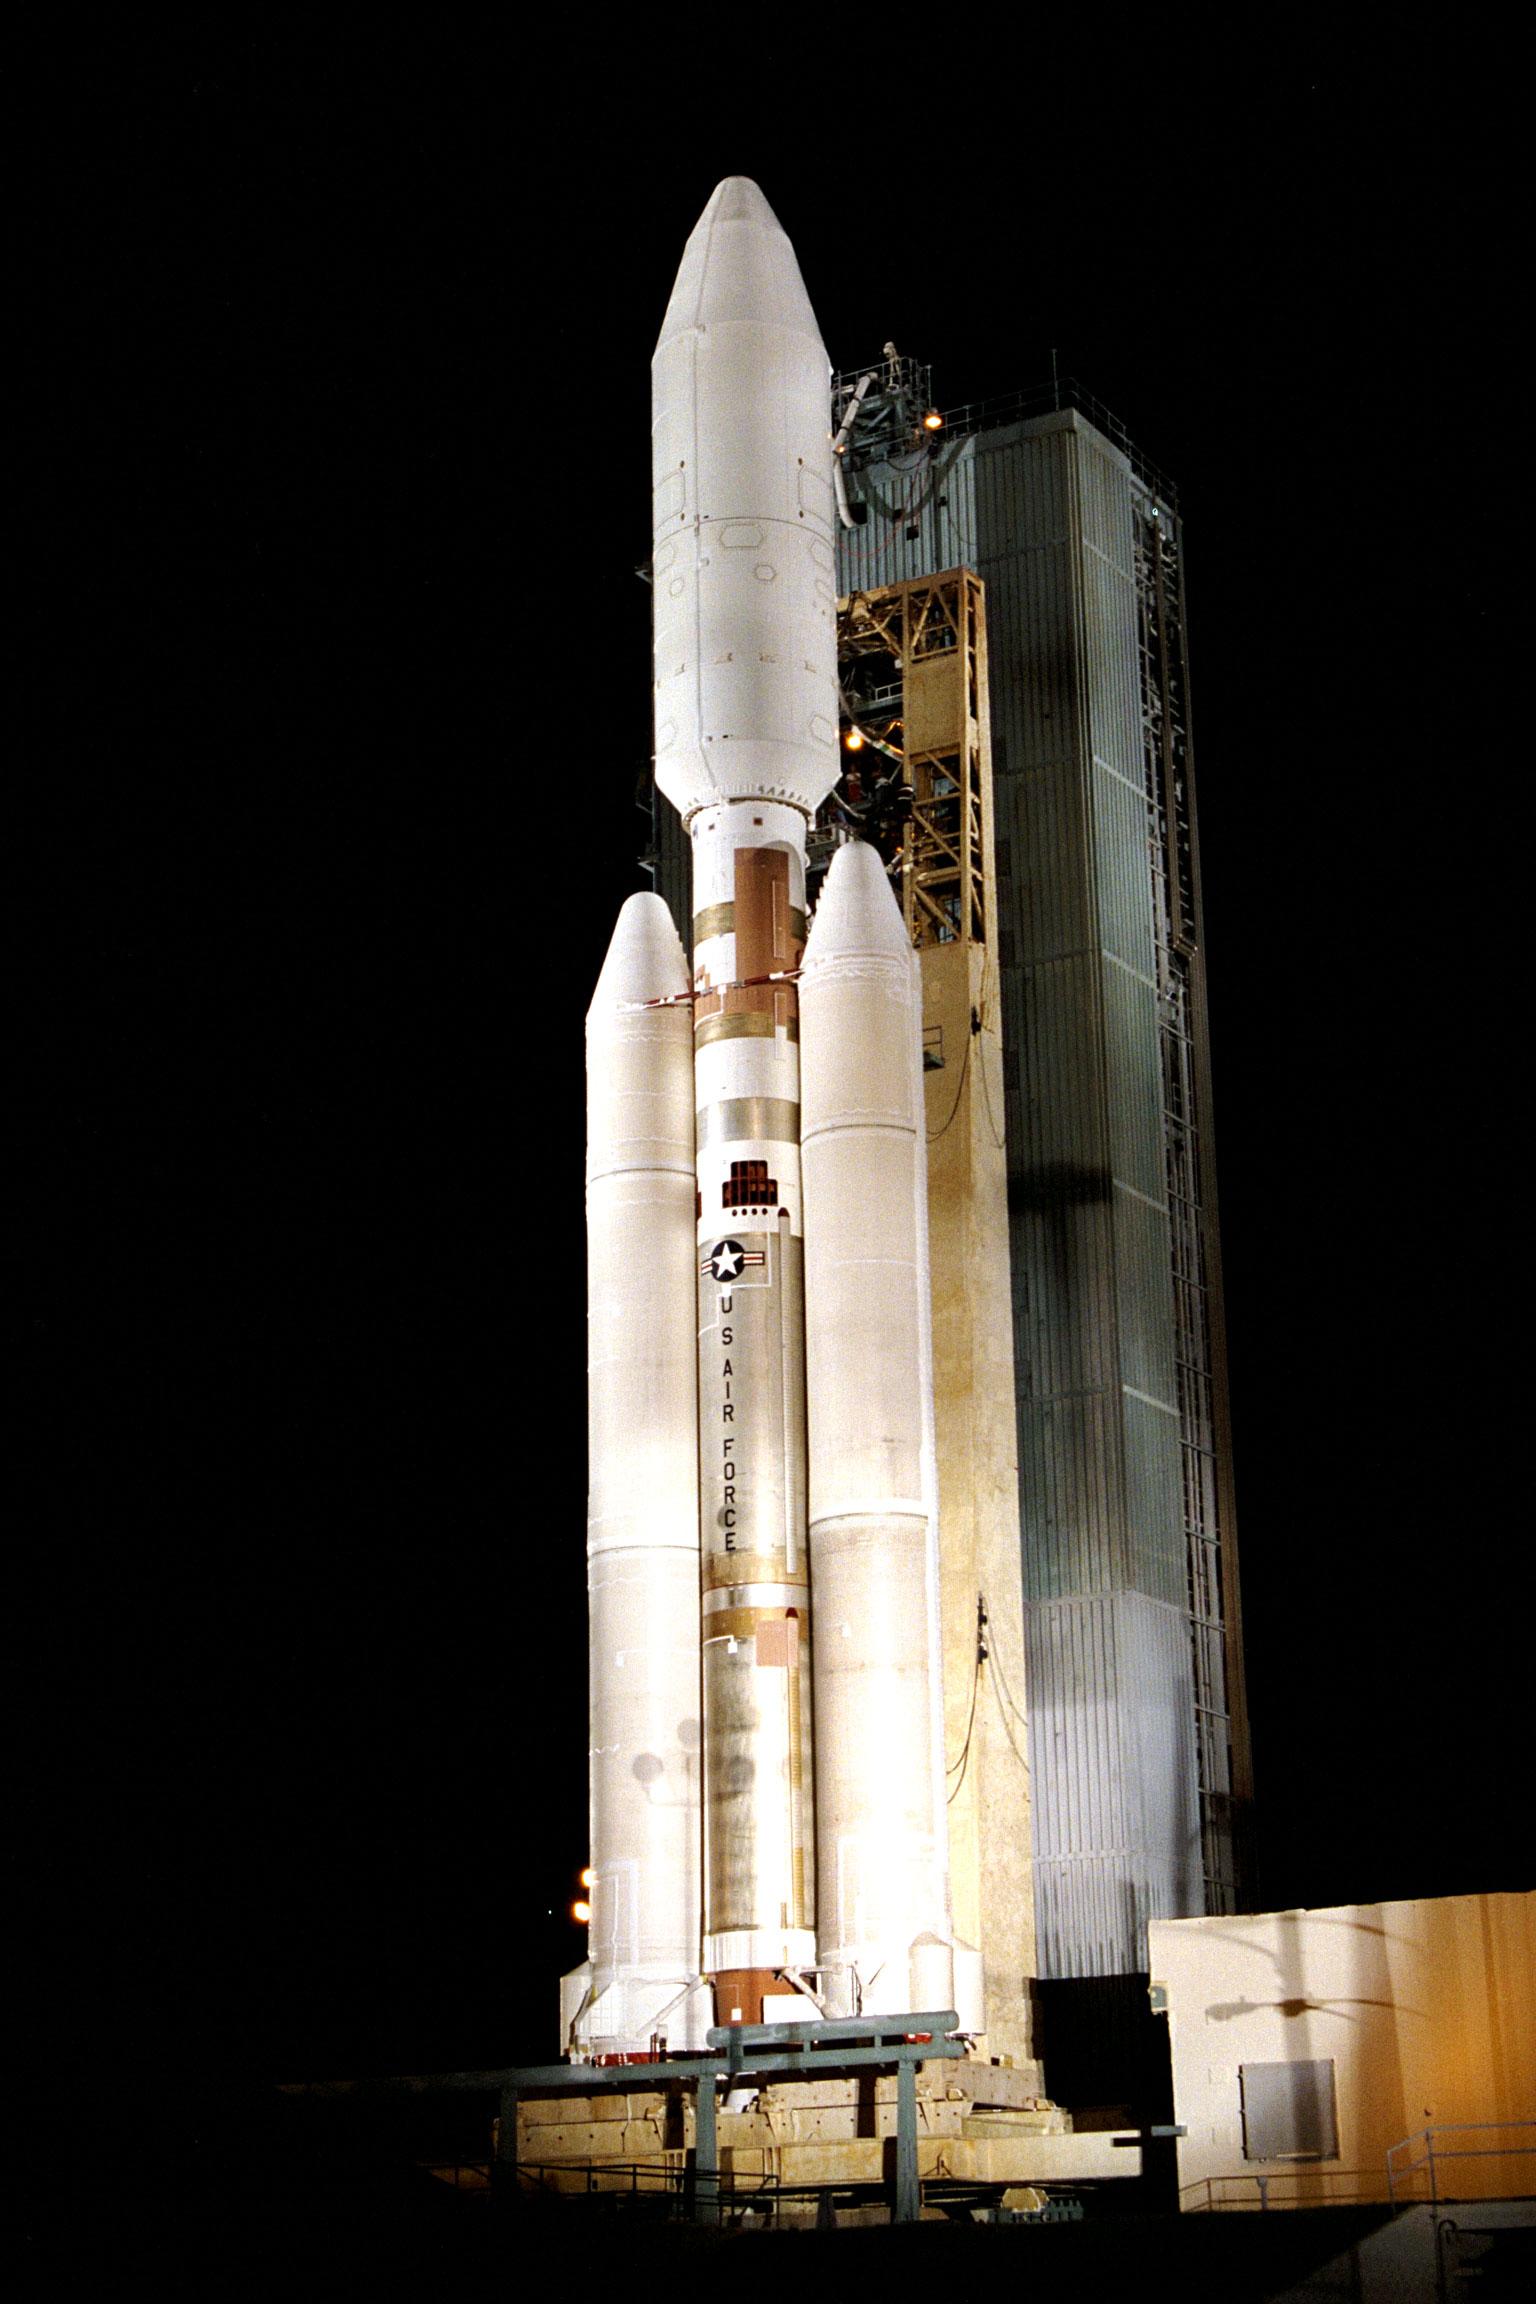 Titan 4B with Cassini-Huygens on board with the second launch attempt at Lauch Pad 40